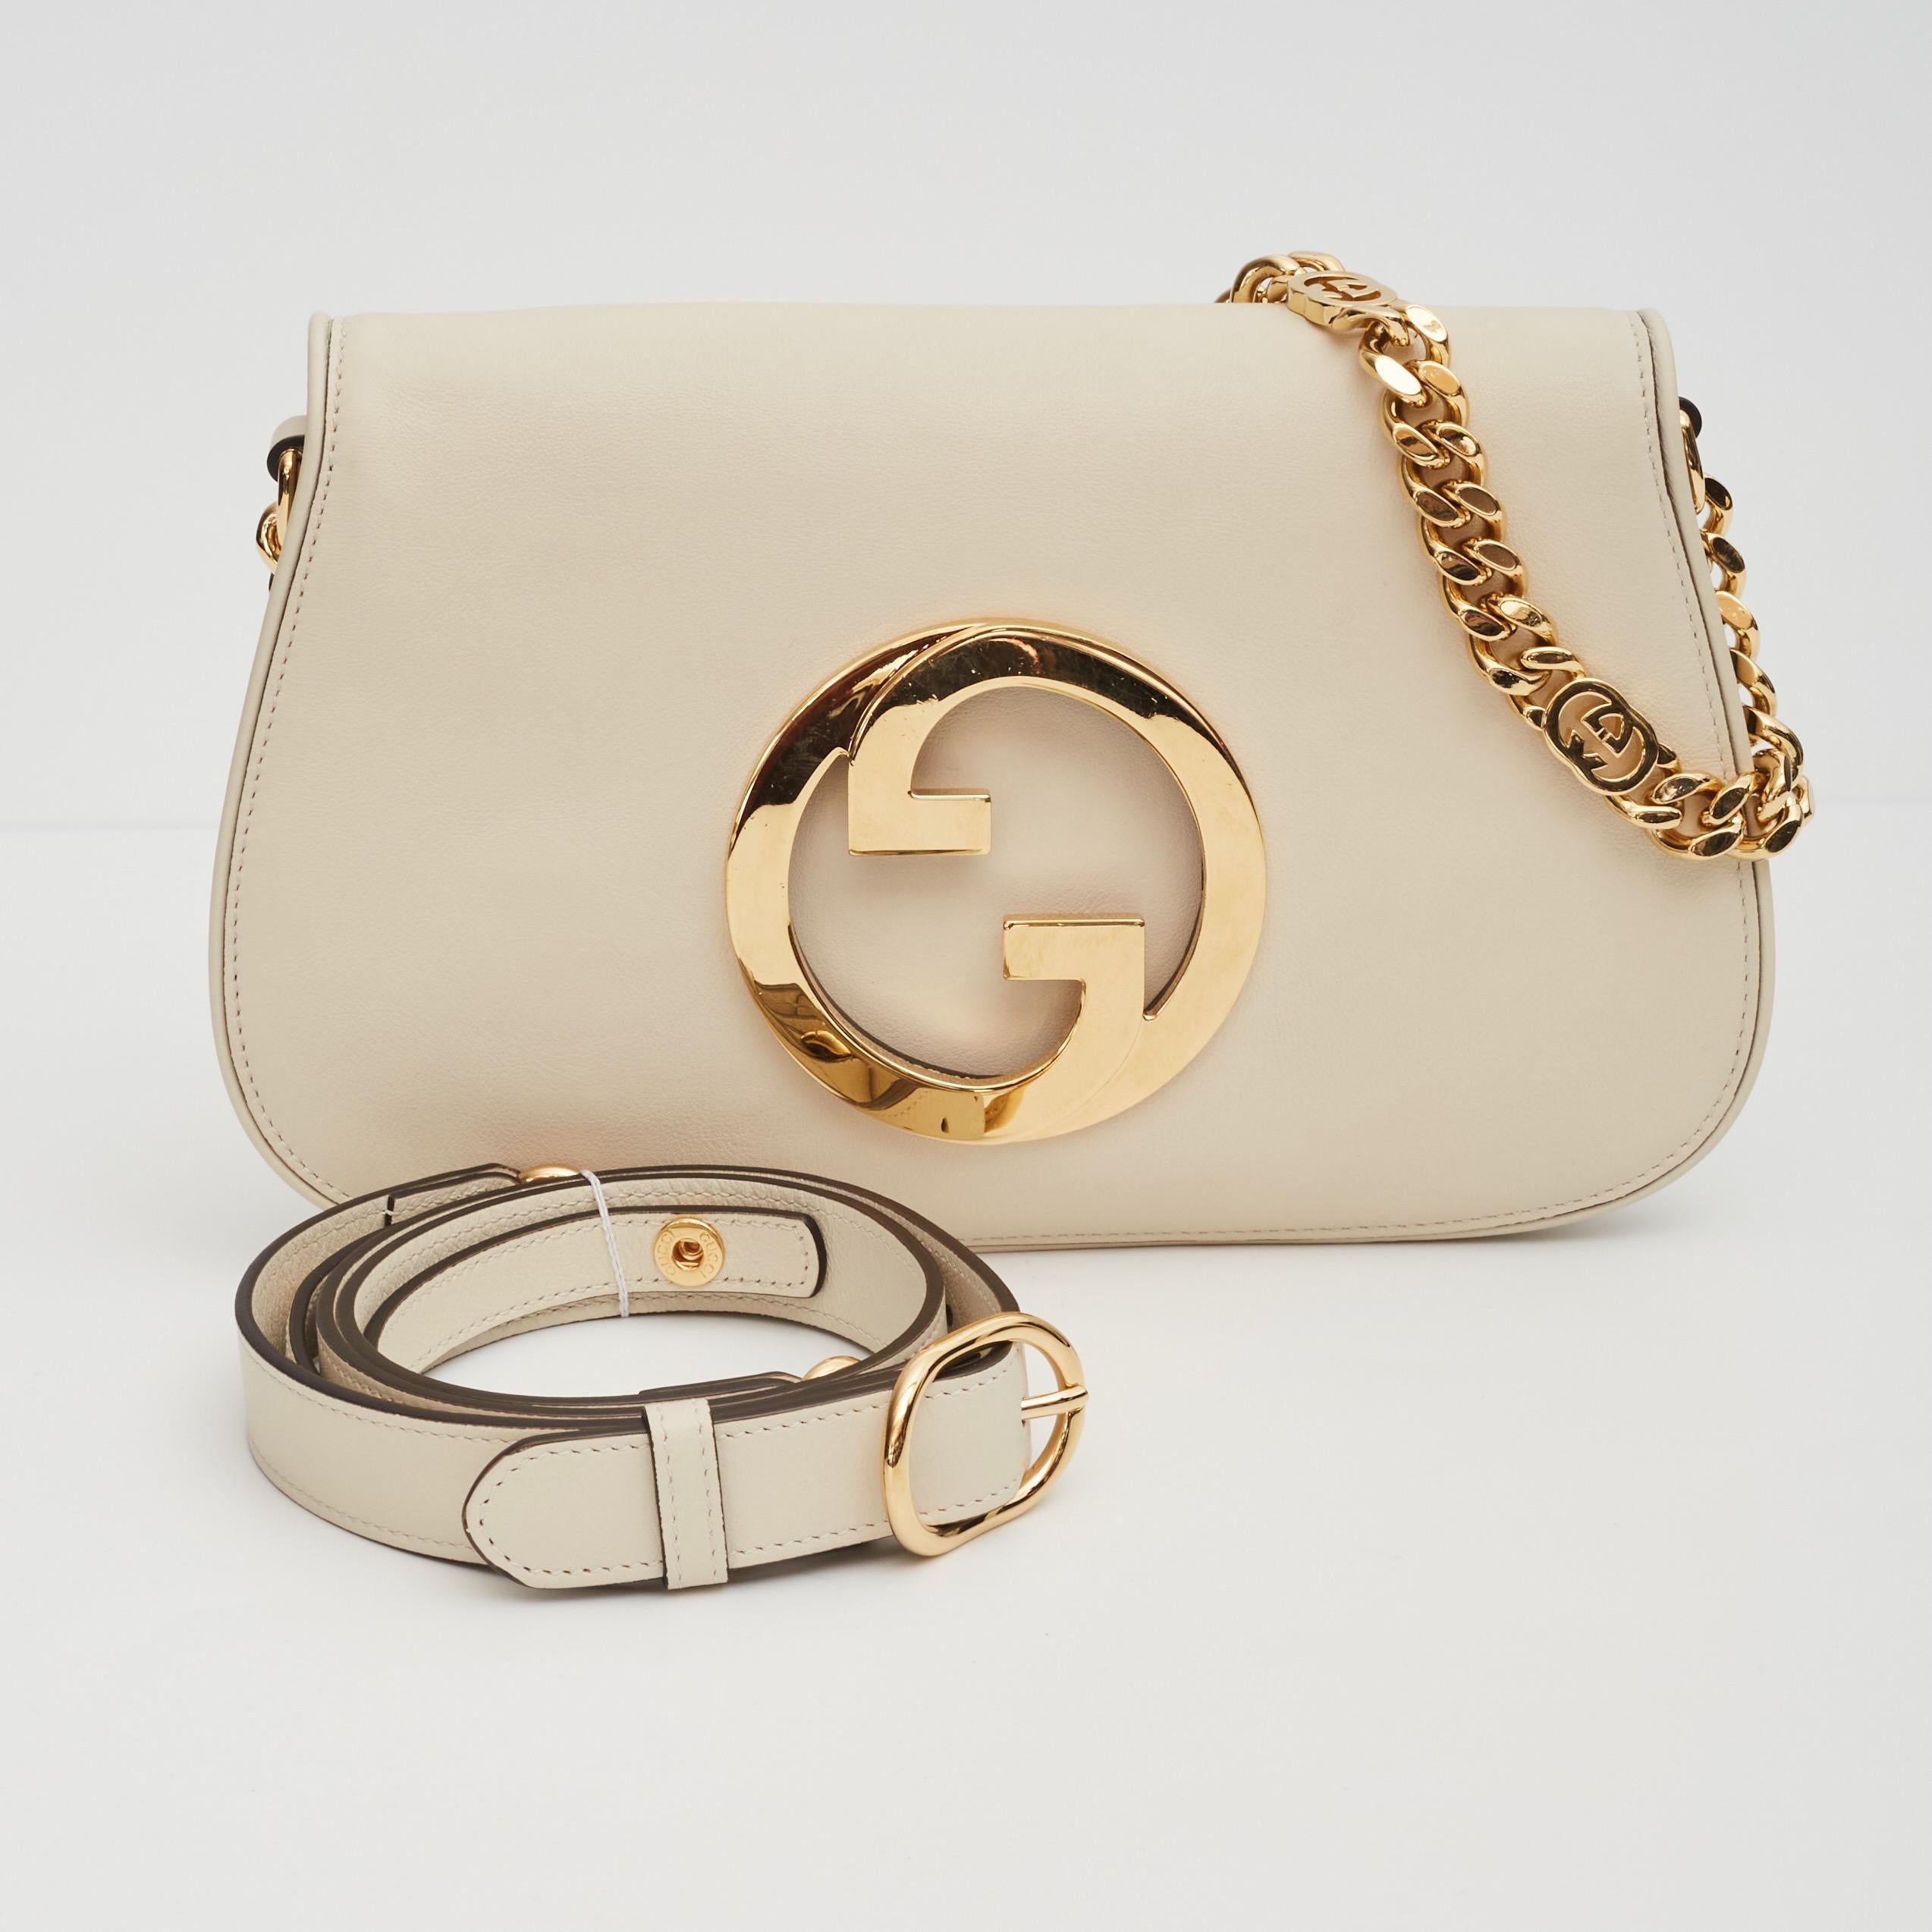 Gucci White Leather Blondie Shoulder Bag (699268) For Sale 8